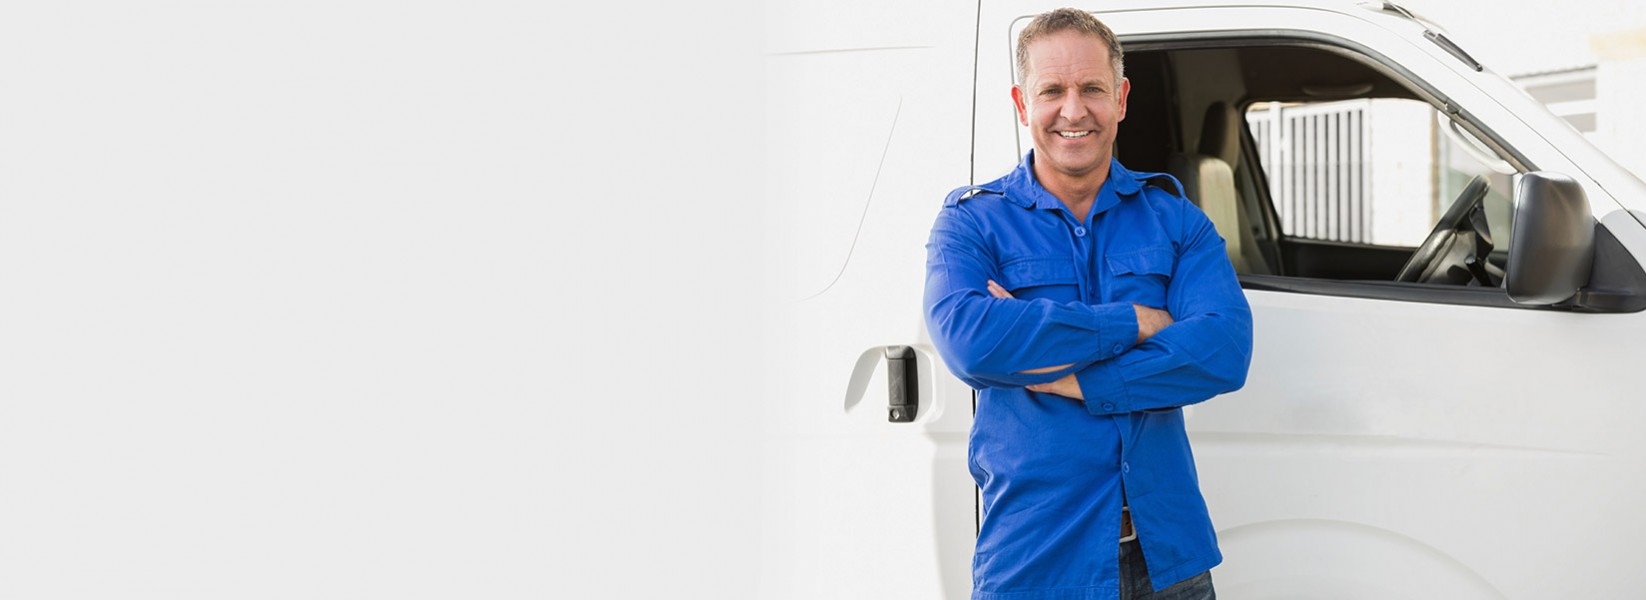 Water Heaters and Tankless Service Technician